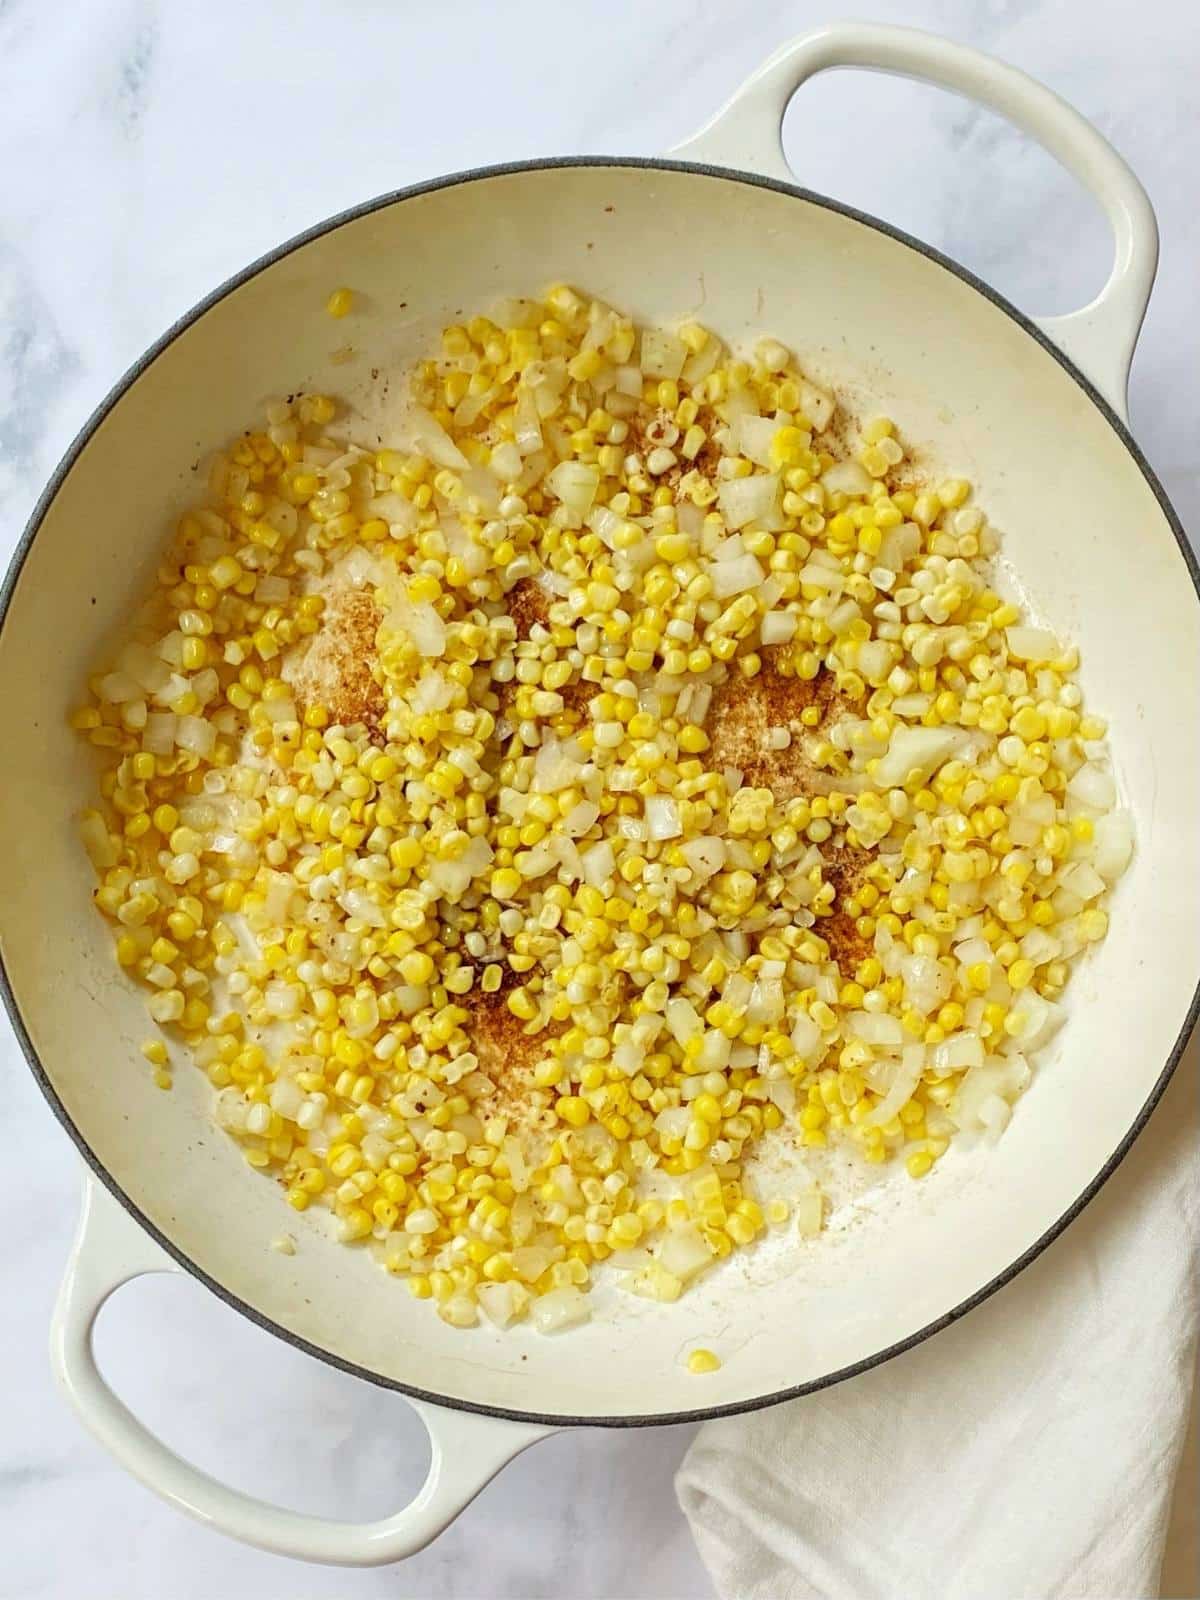 sweet corn and onions cooking in the skillet.